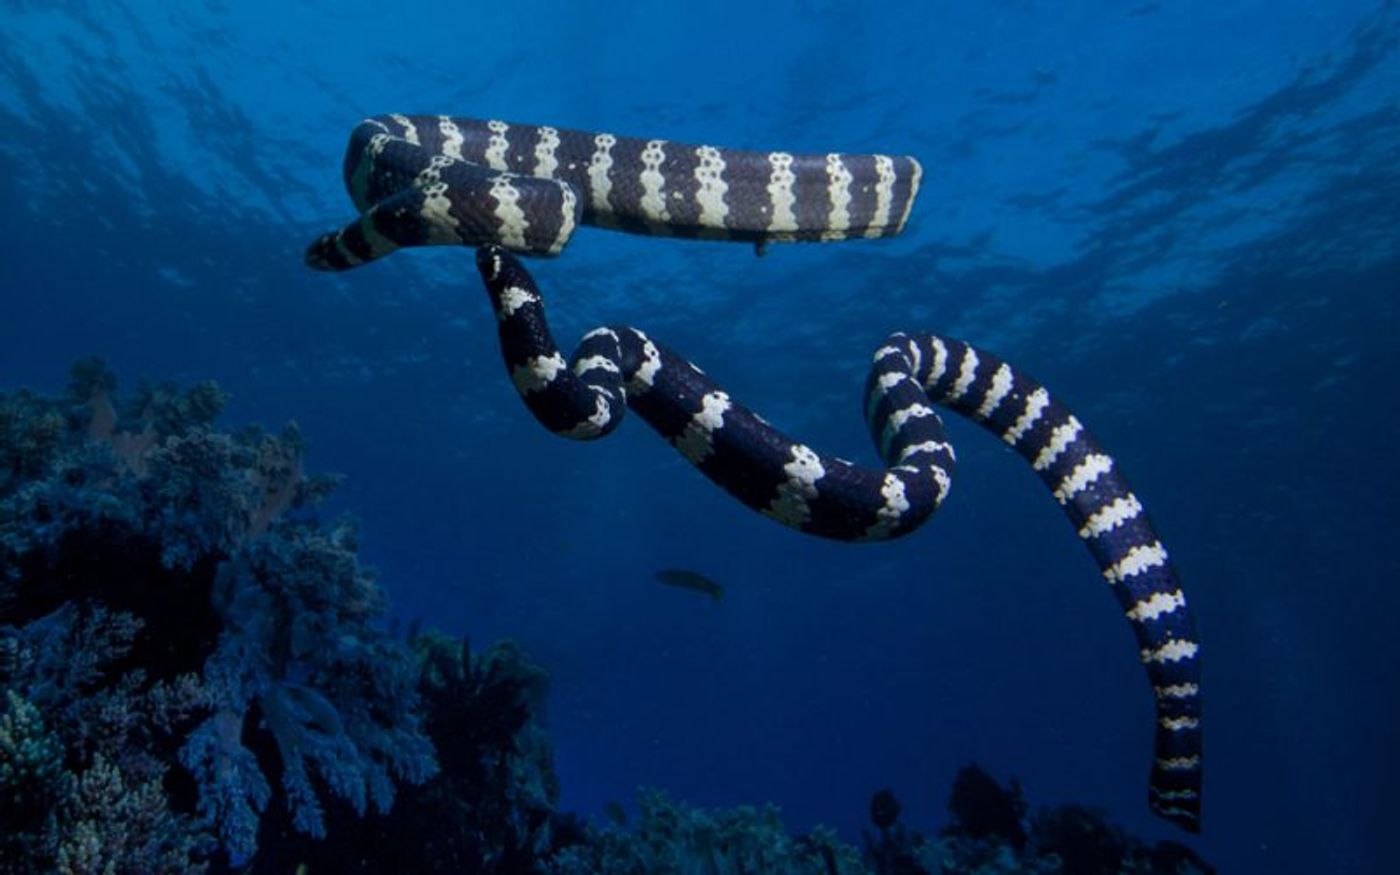 Do sea snakes have another sense that land snakes don't?